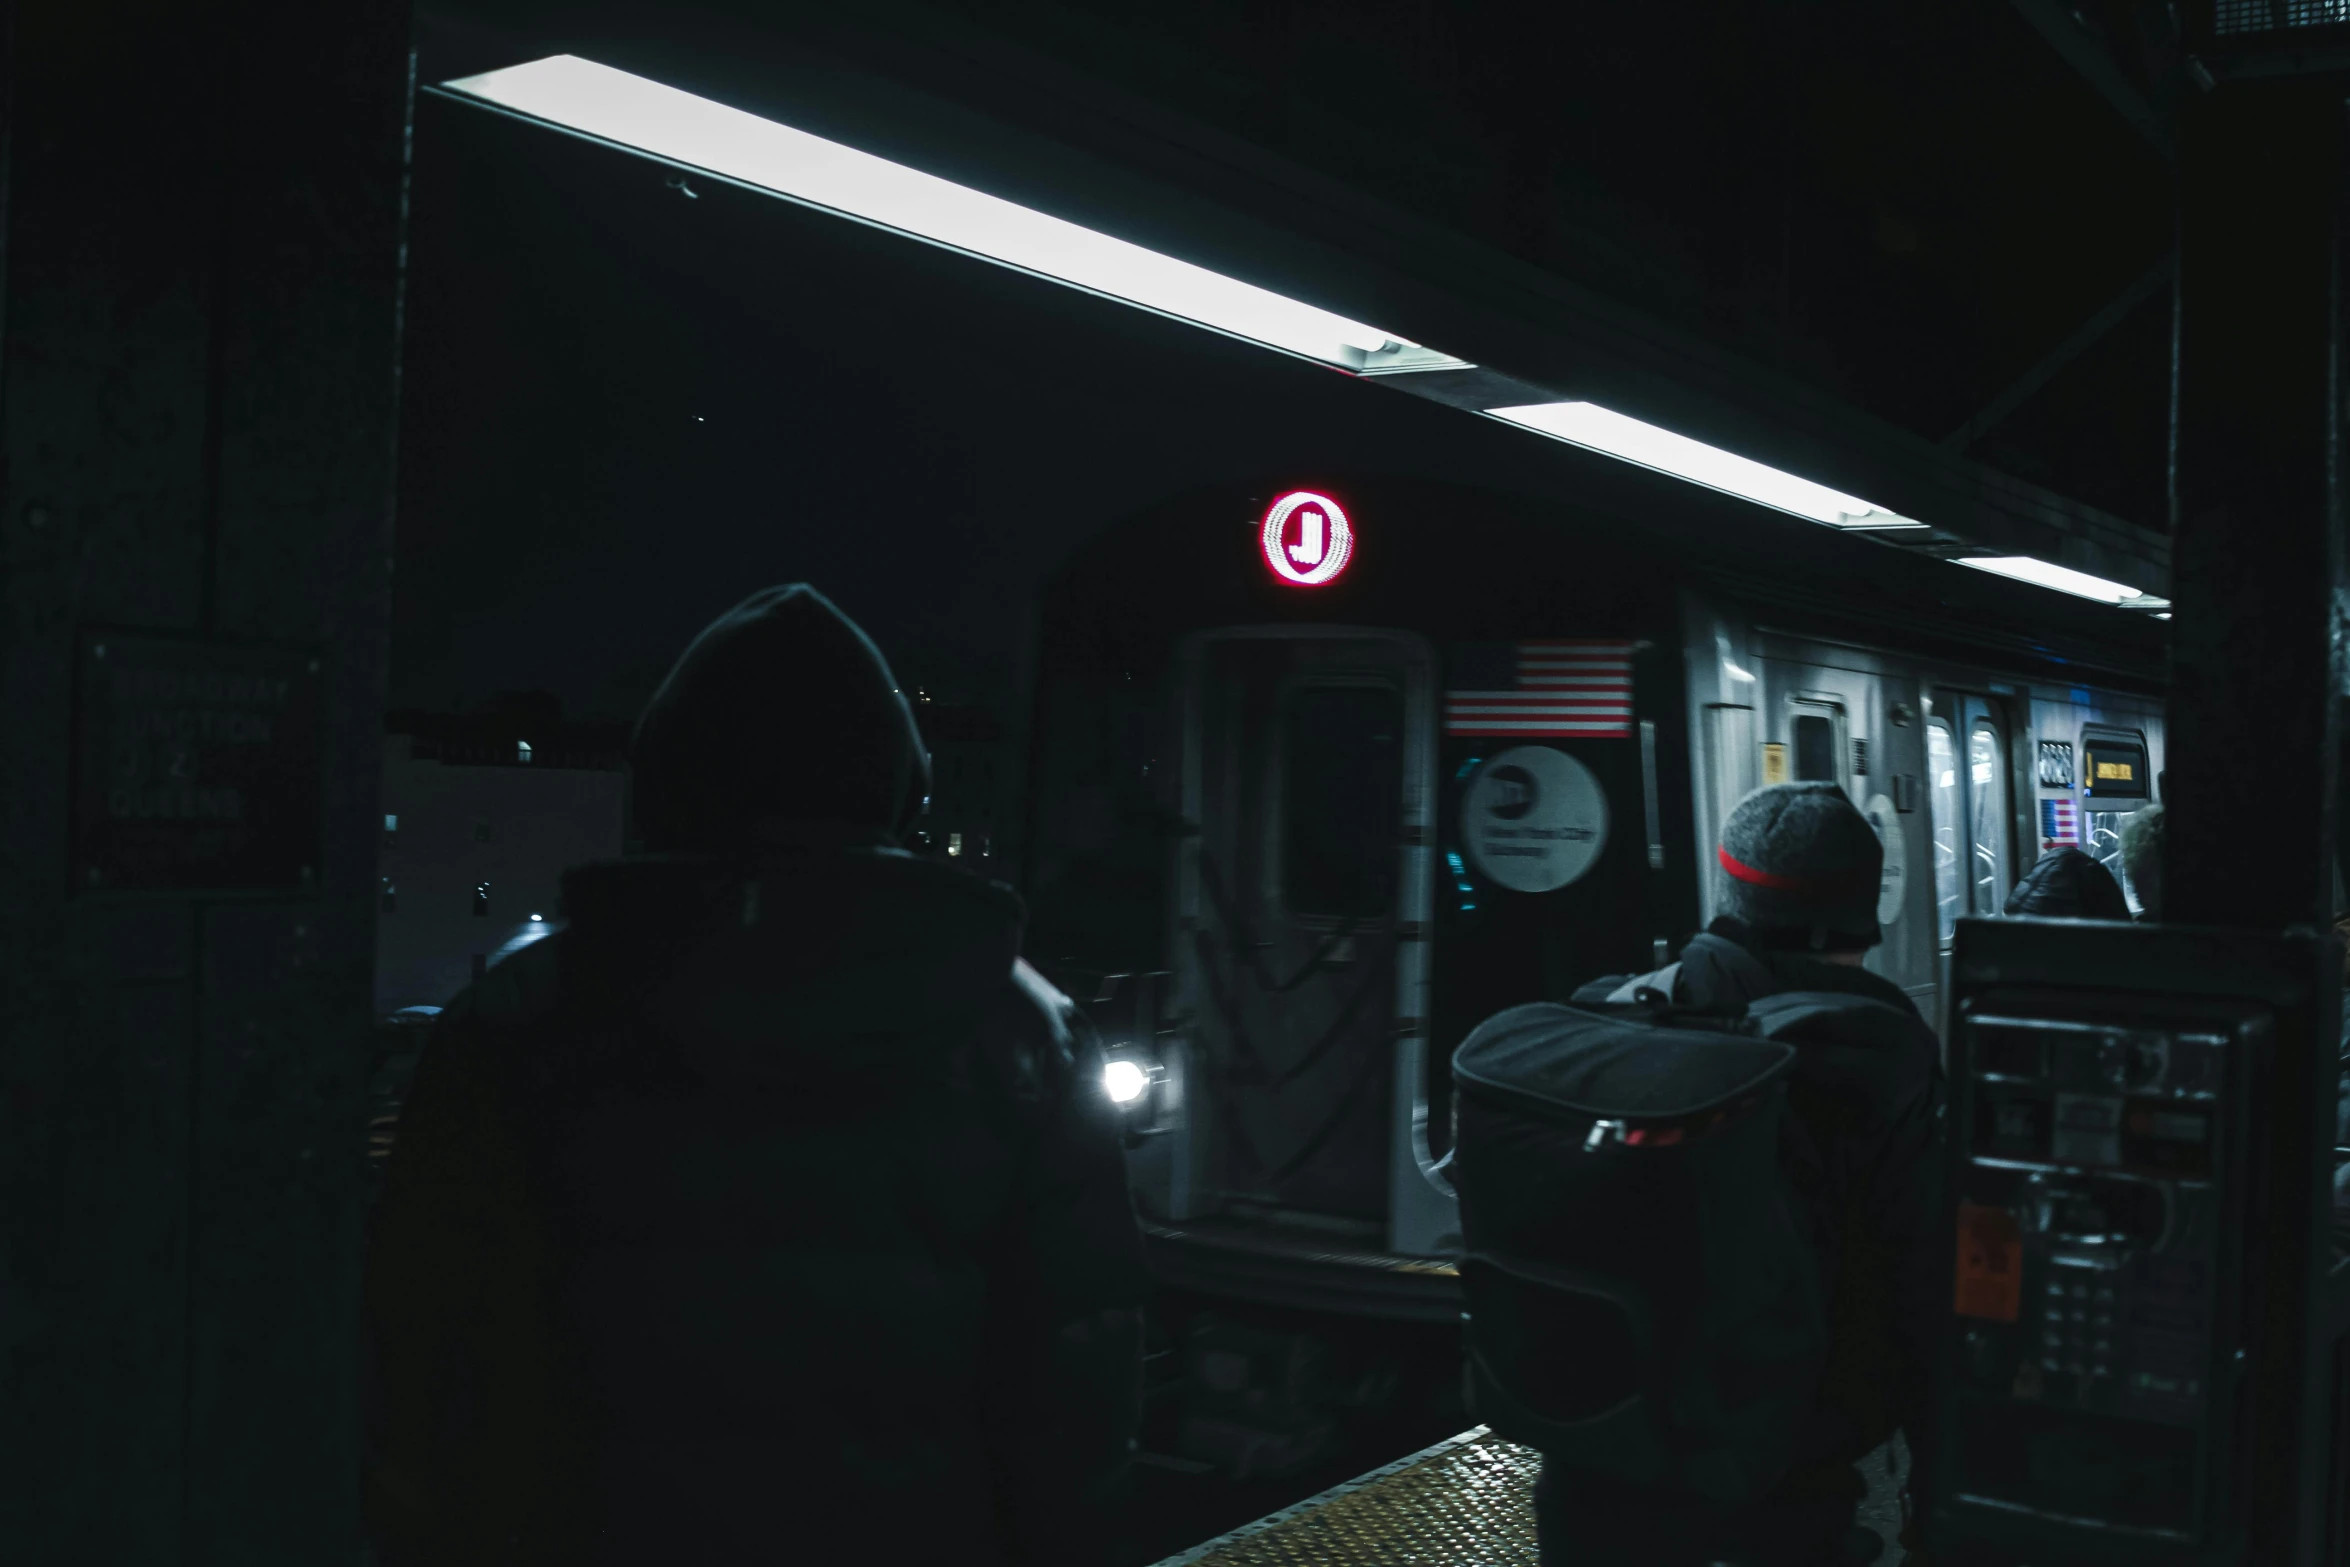 a couple of people that are standing in front of a train, by Elsa Bleda, night time footage, mta subway entrance, distant hooded figures, 🦑 design